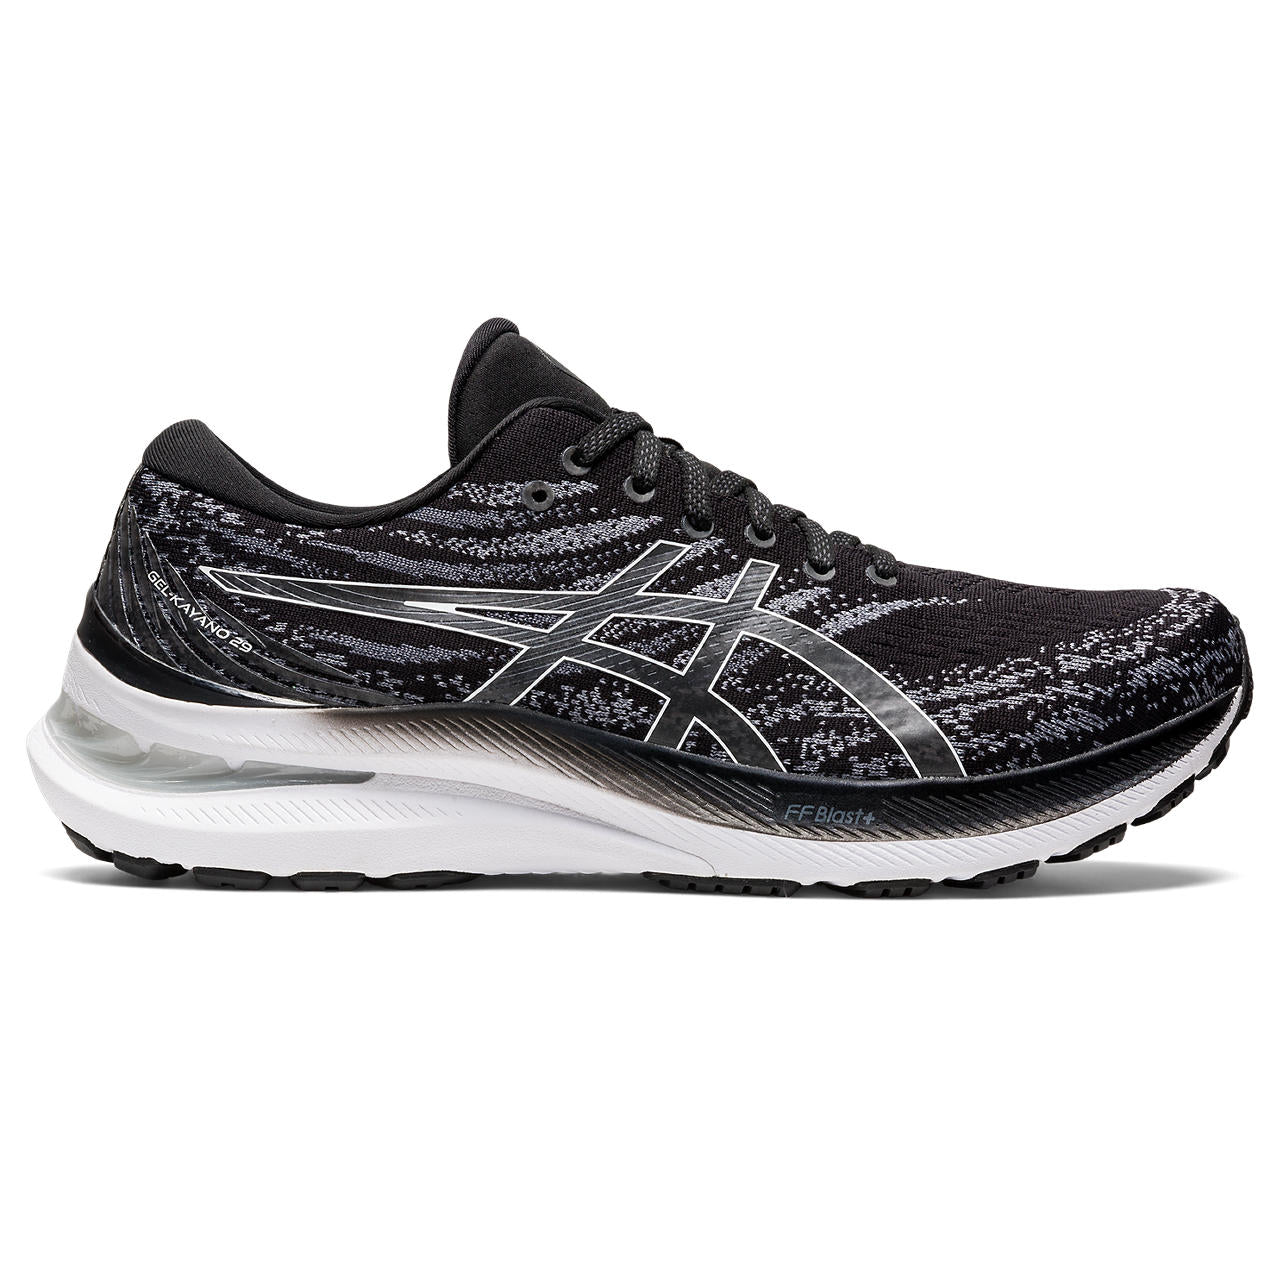 The Gel-Kayano 29 creates a stable running experience and a more responsive feel underfoot. Featuring a low-profile external heel counter, this piece comfortably cradles your foot with advanced rearfoot support. Asics also updated the midsole with FF BLAST PLUS cushioning. This model is the extra wide 4E width in black and white.